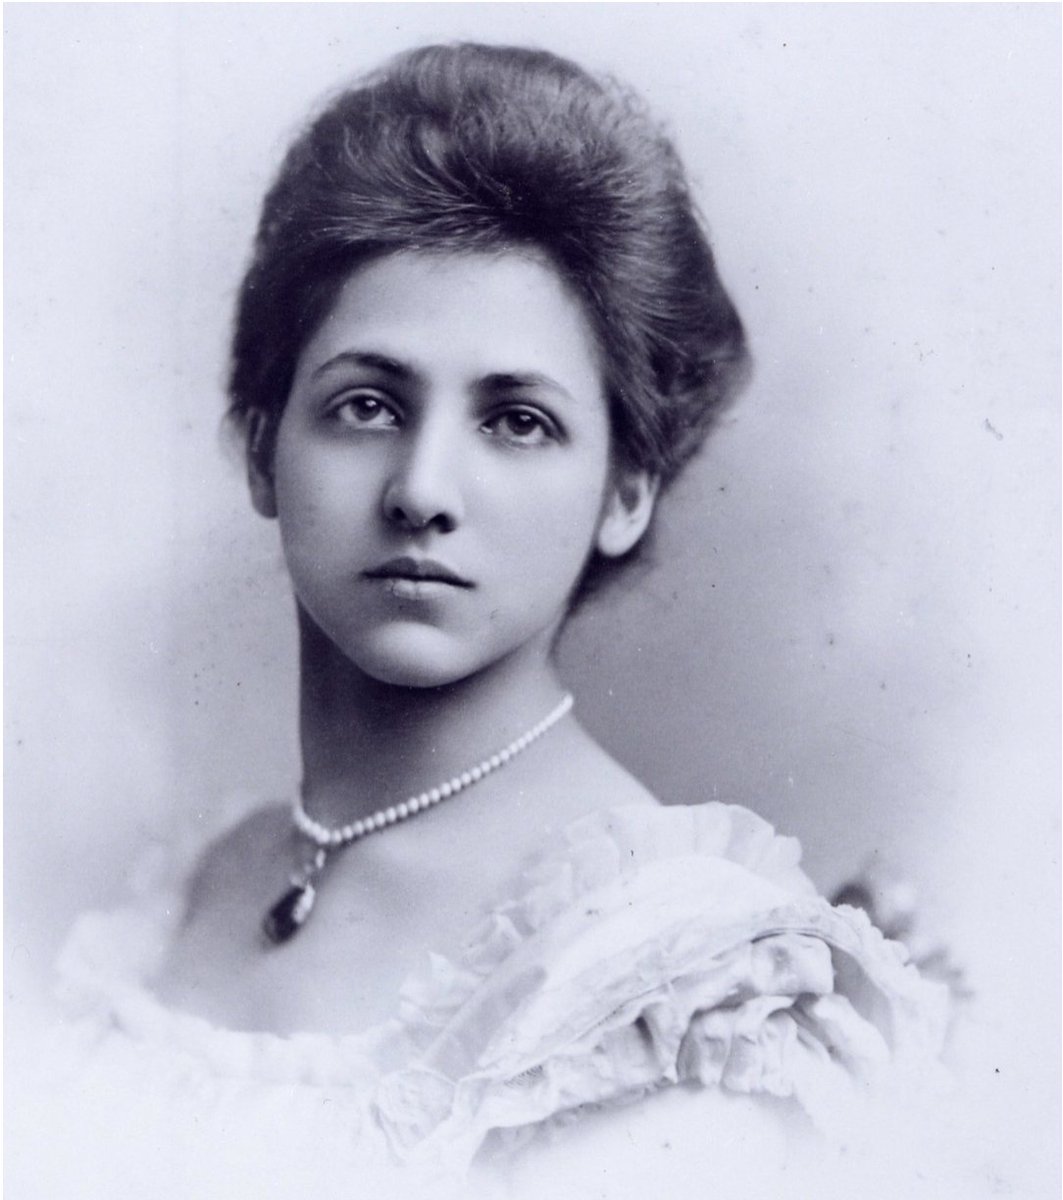 Today's @artukdotorg’s #OnlineArtExchange theme is photography to celebrate @WattsGallery’s Victorian Virtual Reality exhibition.
This is a photograph of Princess Catherine Duleep Singh. Find out more about her in our pop up exhibition on Sunday 9 July 2023.